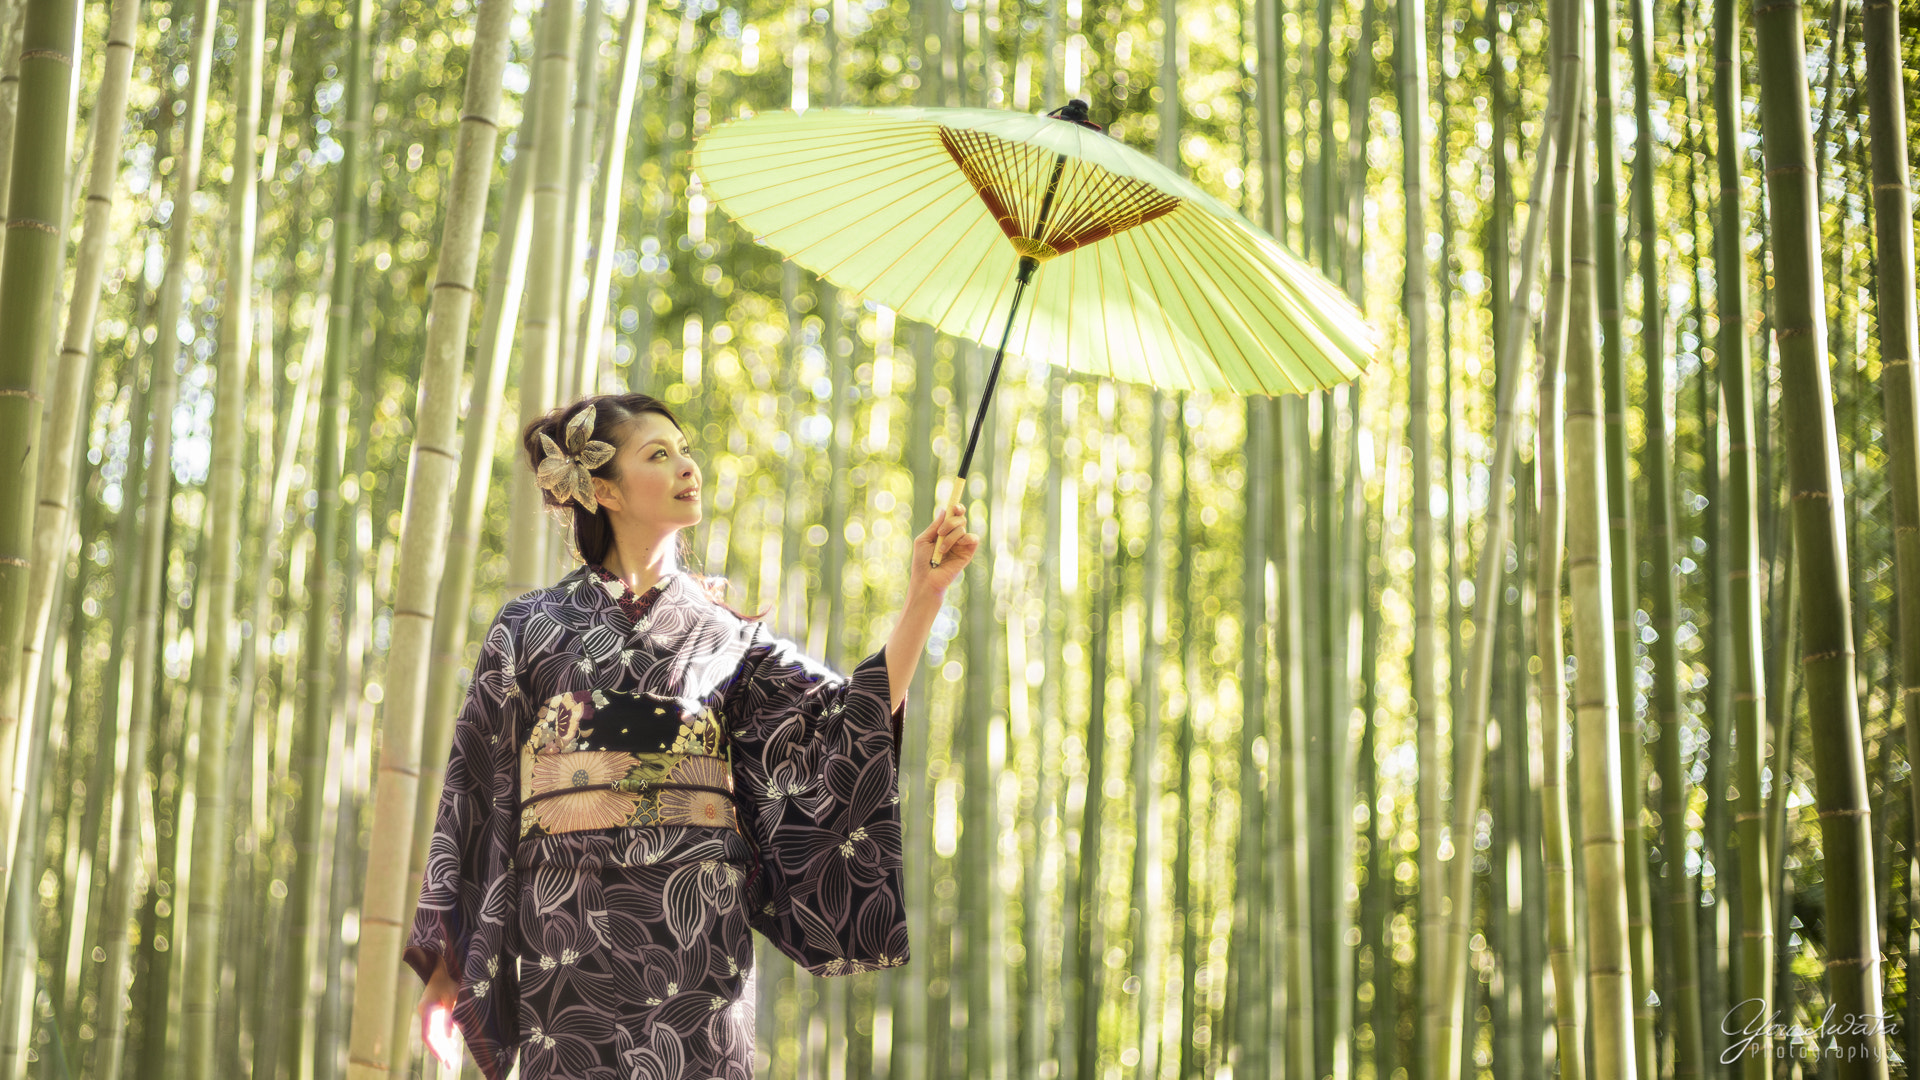 Sony a7R II sample photo. A day in kimono photography